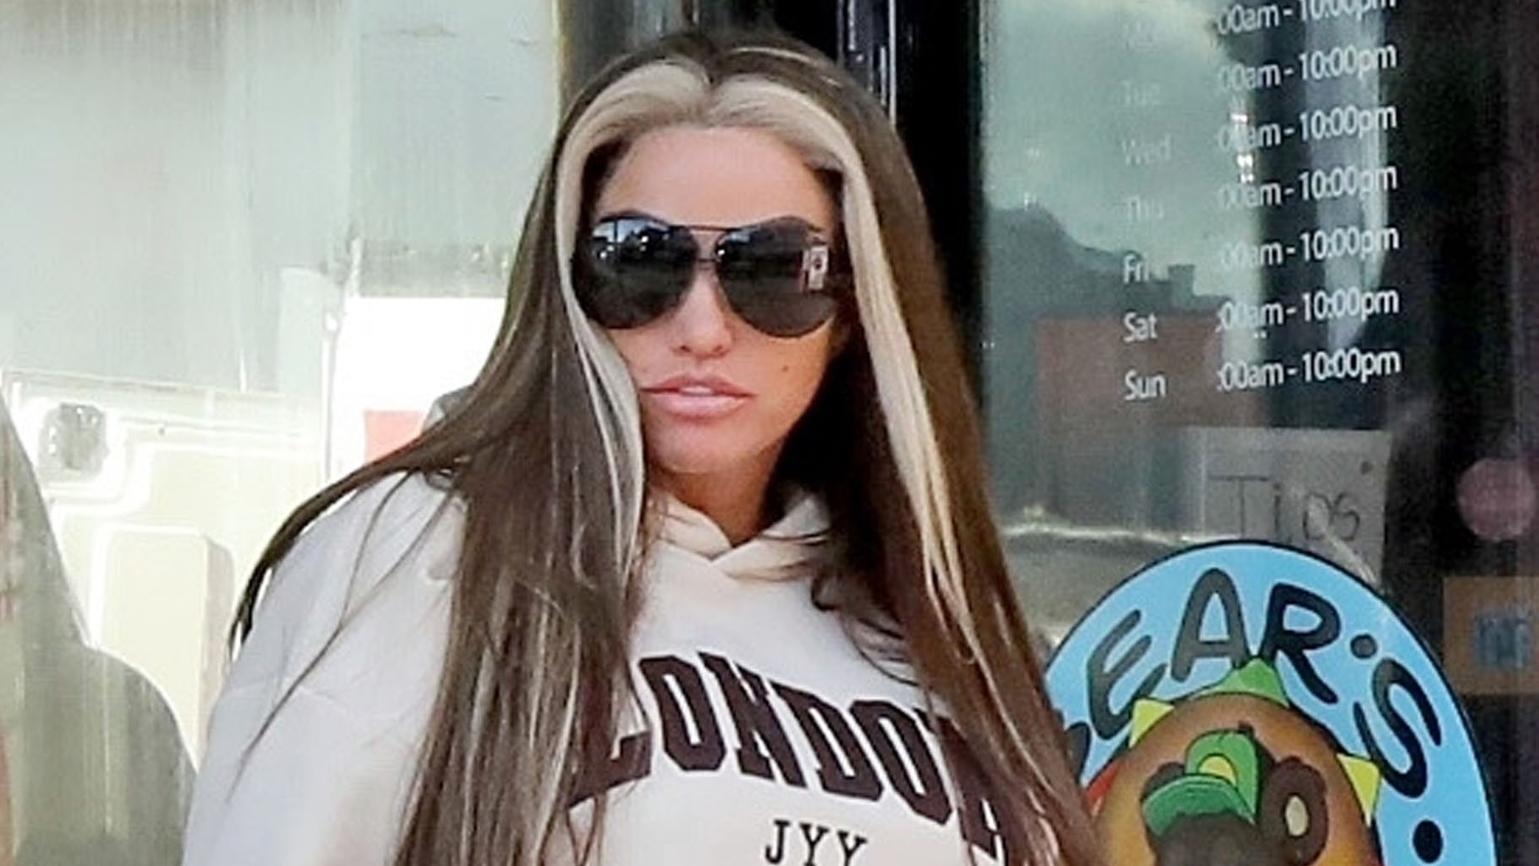 SONDERKONDITIONEN: MINDESTHONORAR: BGUK_2514427 - Littlehampton, UNITED KINGDOM - *EXCLUSIVE* - The British Glamour Model Katie Price aka Jordan is spotted back in the UK fresh from her relaxing holiday vacation out in Thailand.Katie enjoyed a little